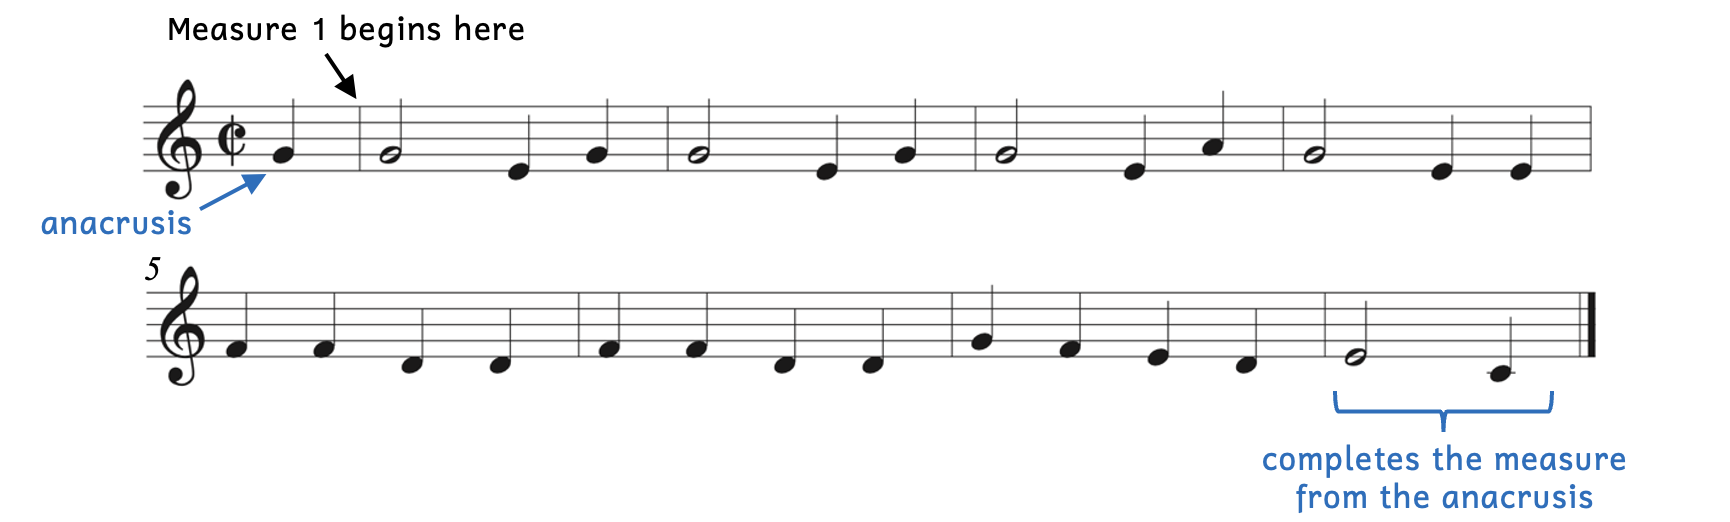 The time signature is cut time and begins with a quarter note and a bar line. The quarter note is an anacrusis and measure 1 begins on the downbeat of the next measure. Since the anacrusis is only a quarter note, the last measure contains a half note and quarter note to complete one full measure.